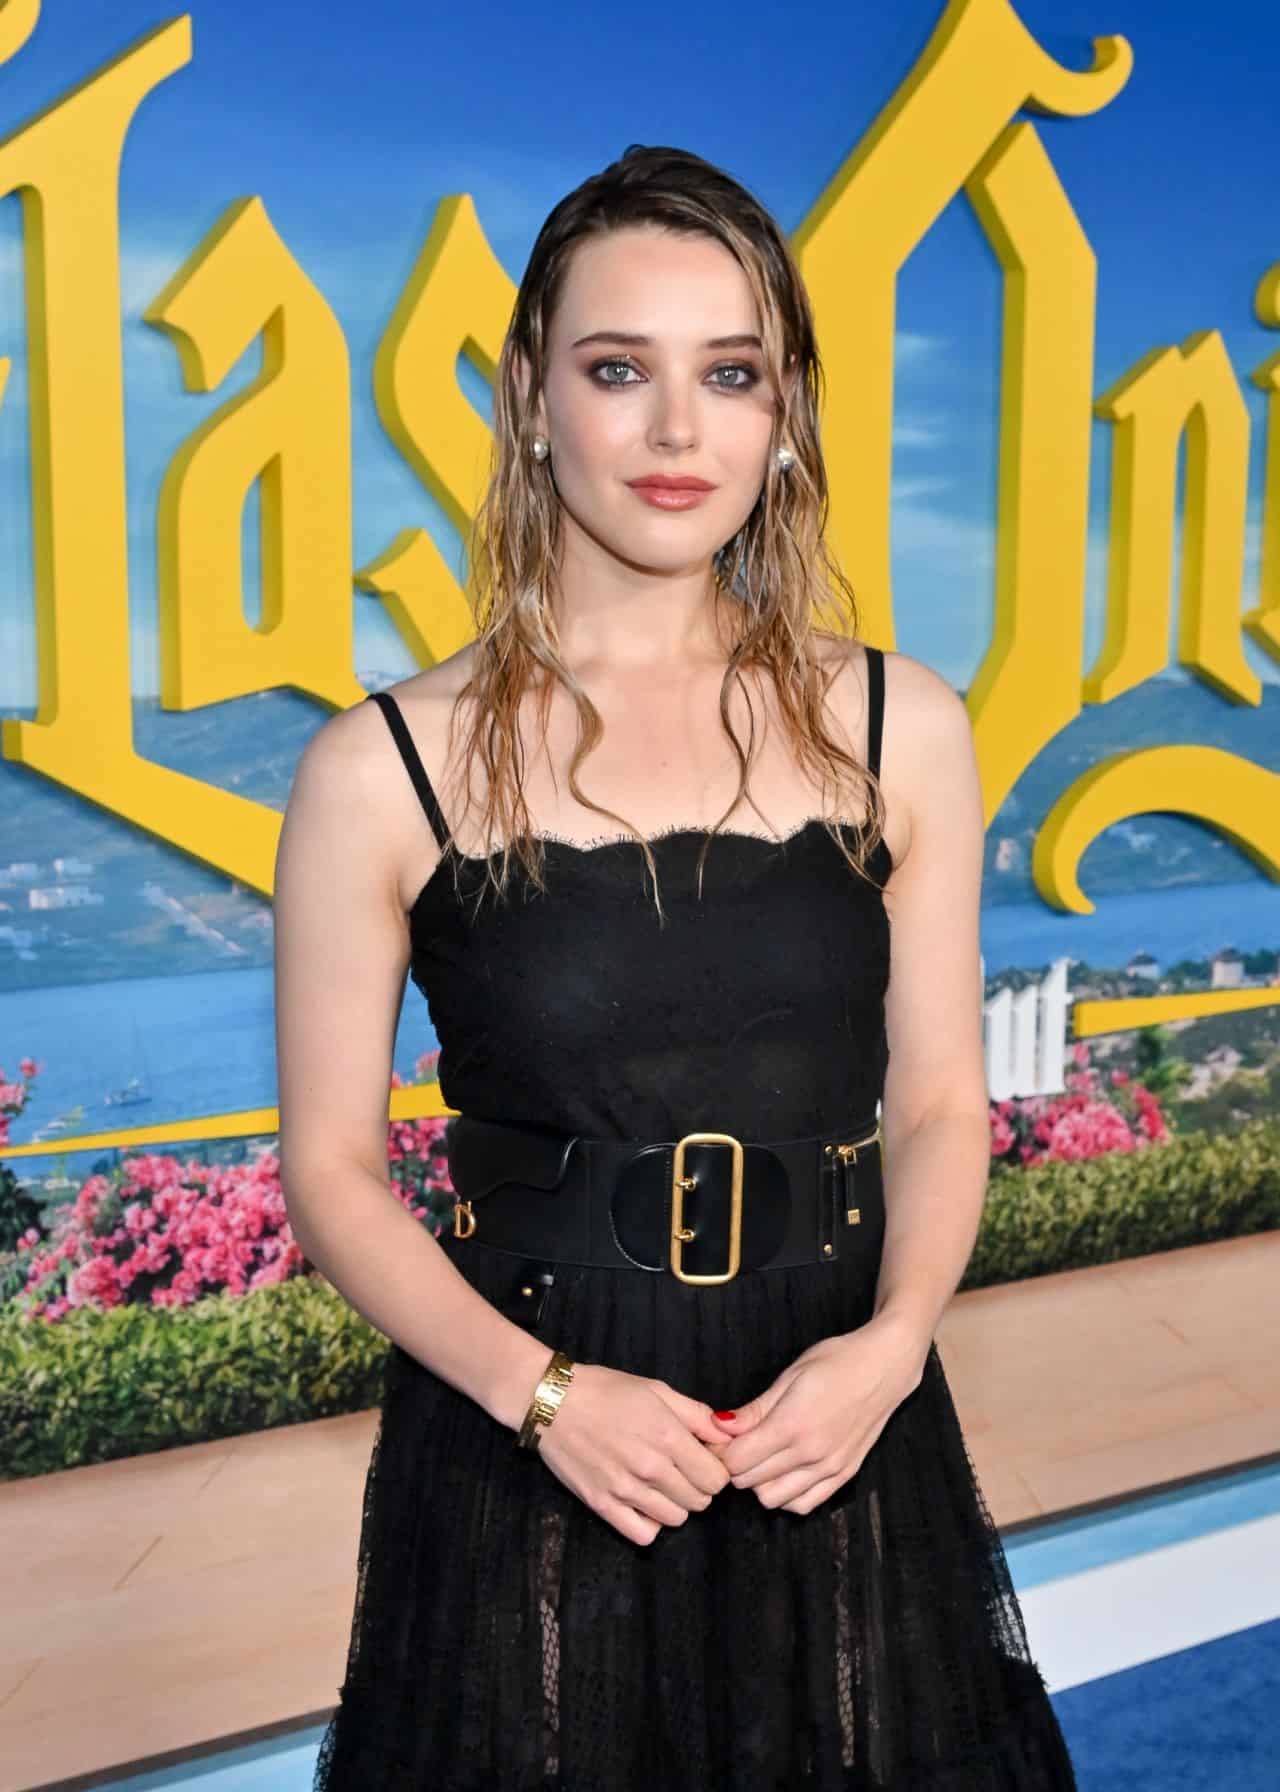 Katherine Langford in an Elegant Lace Dress at the "Glass Onion" Premiere